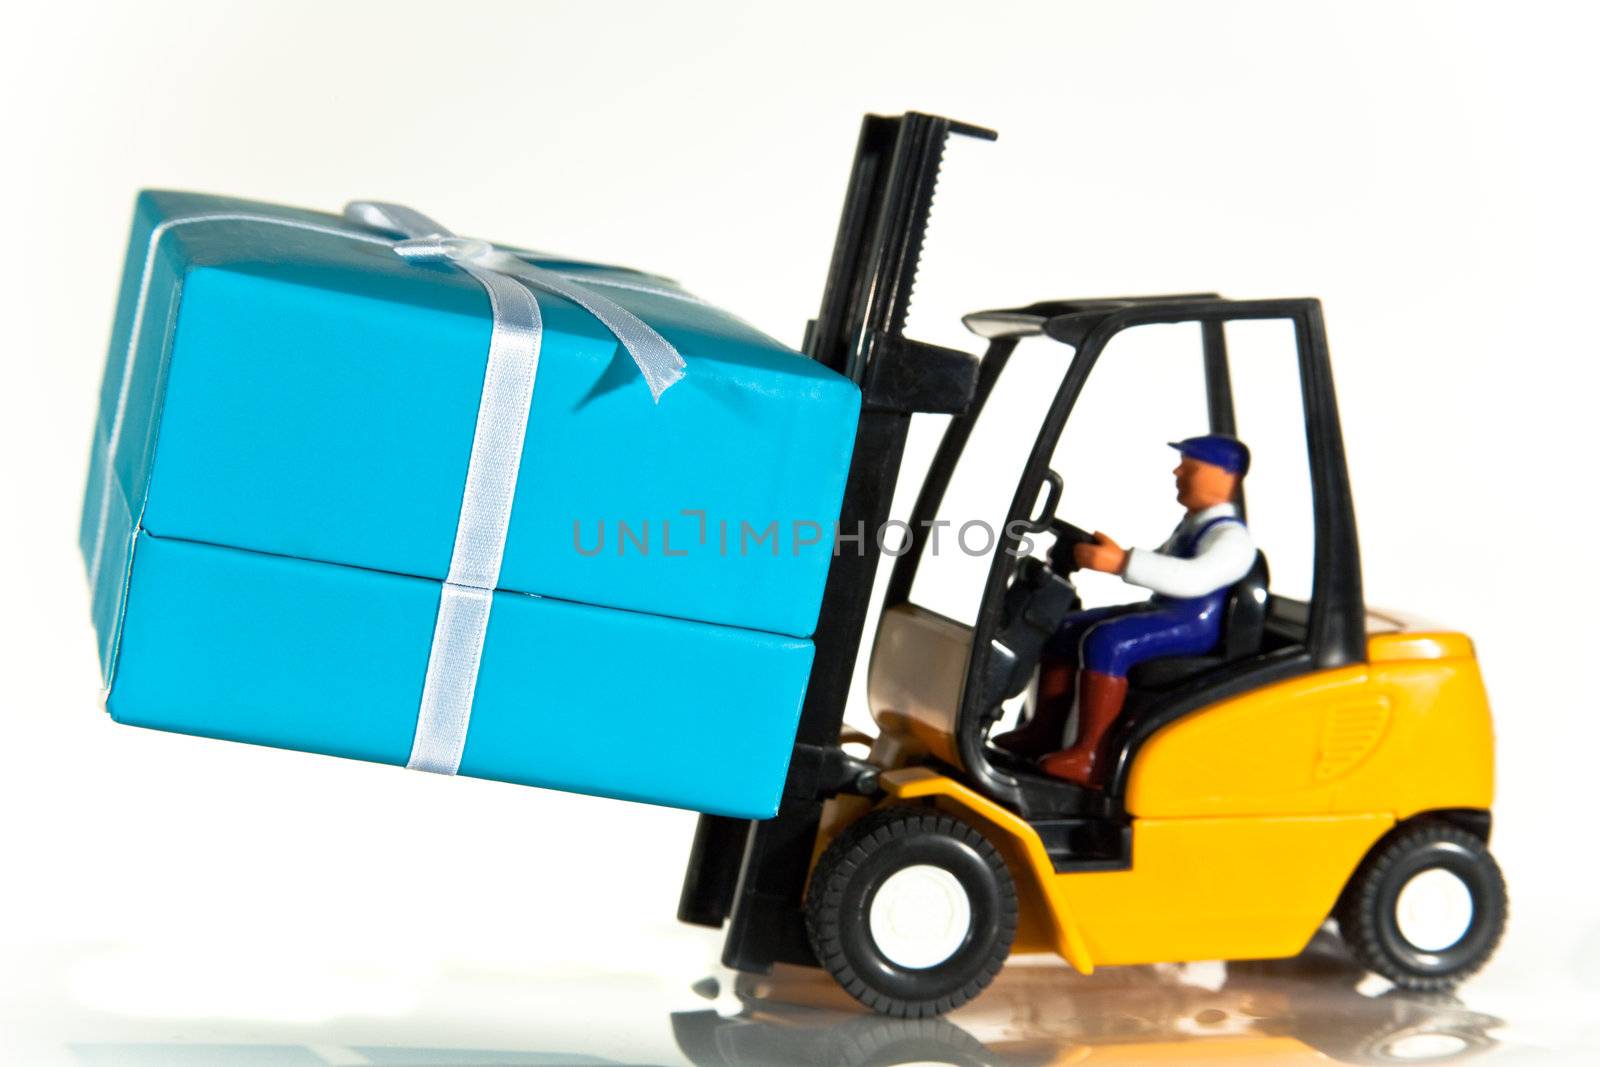 A toy forklift truck delivering a wrapped present